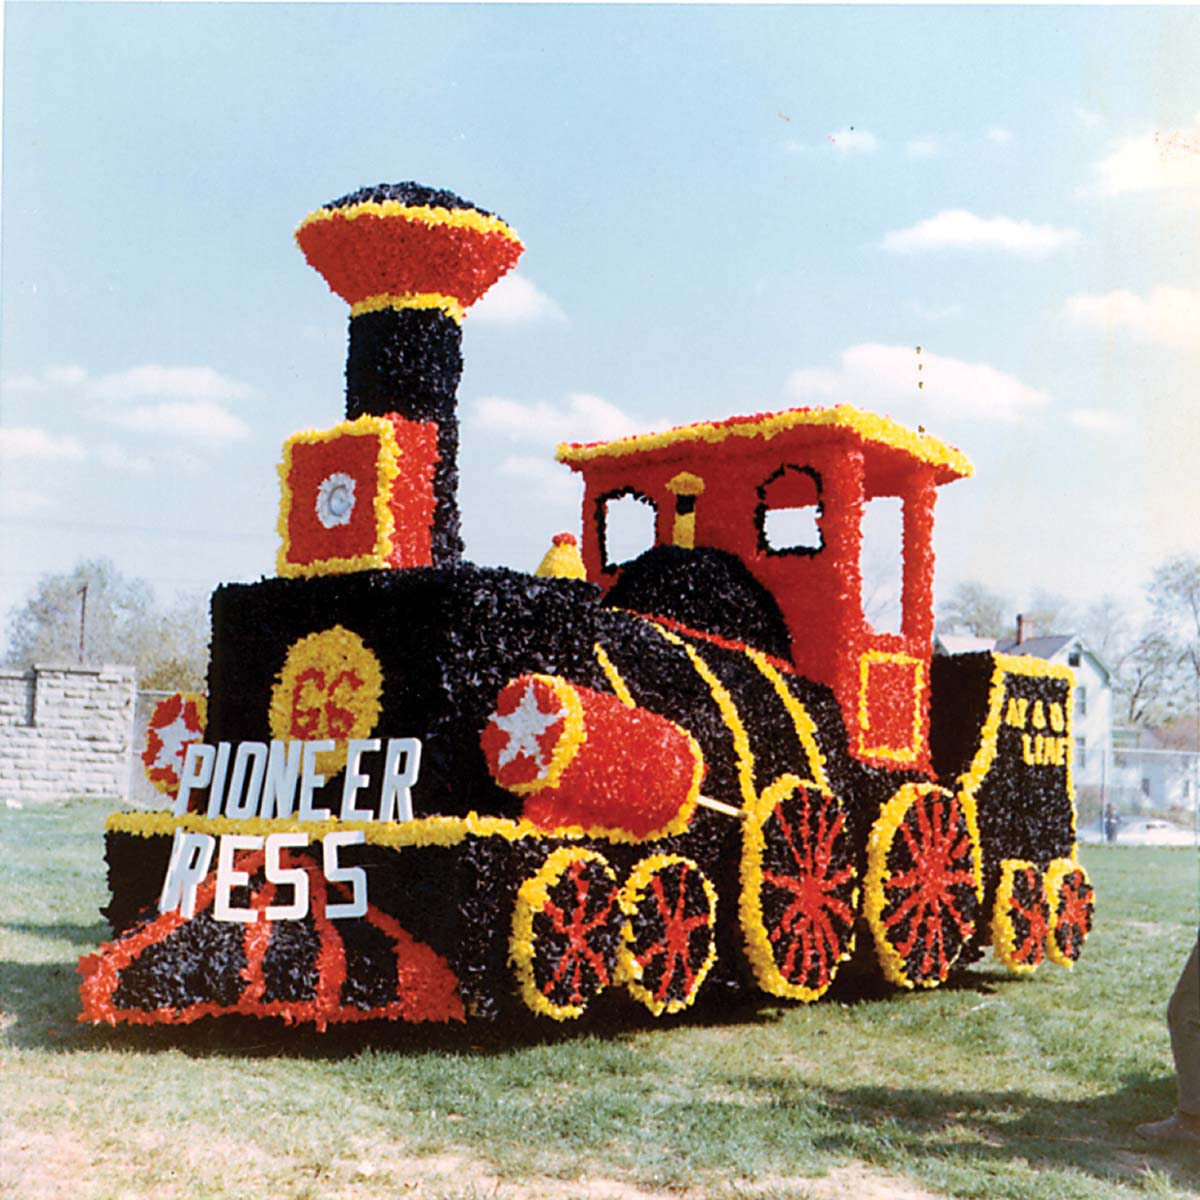 A parade float that looks like a red and black train